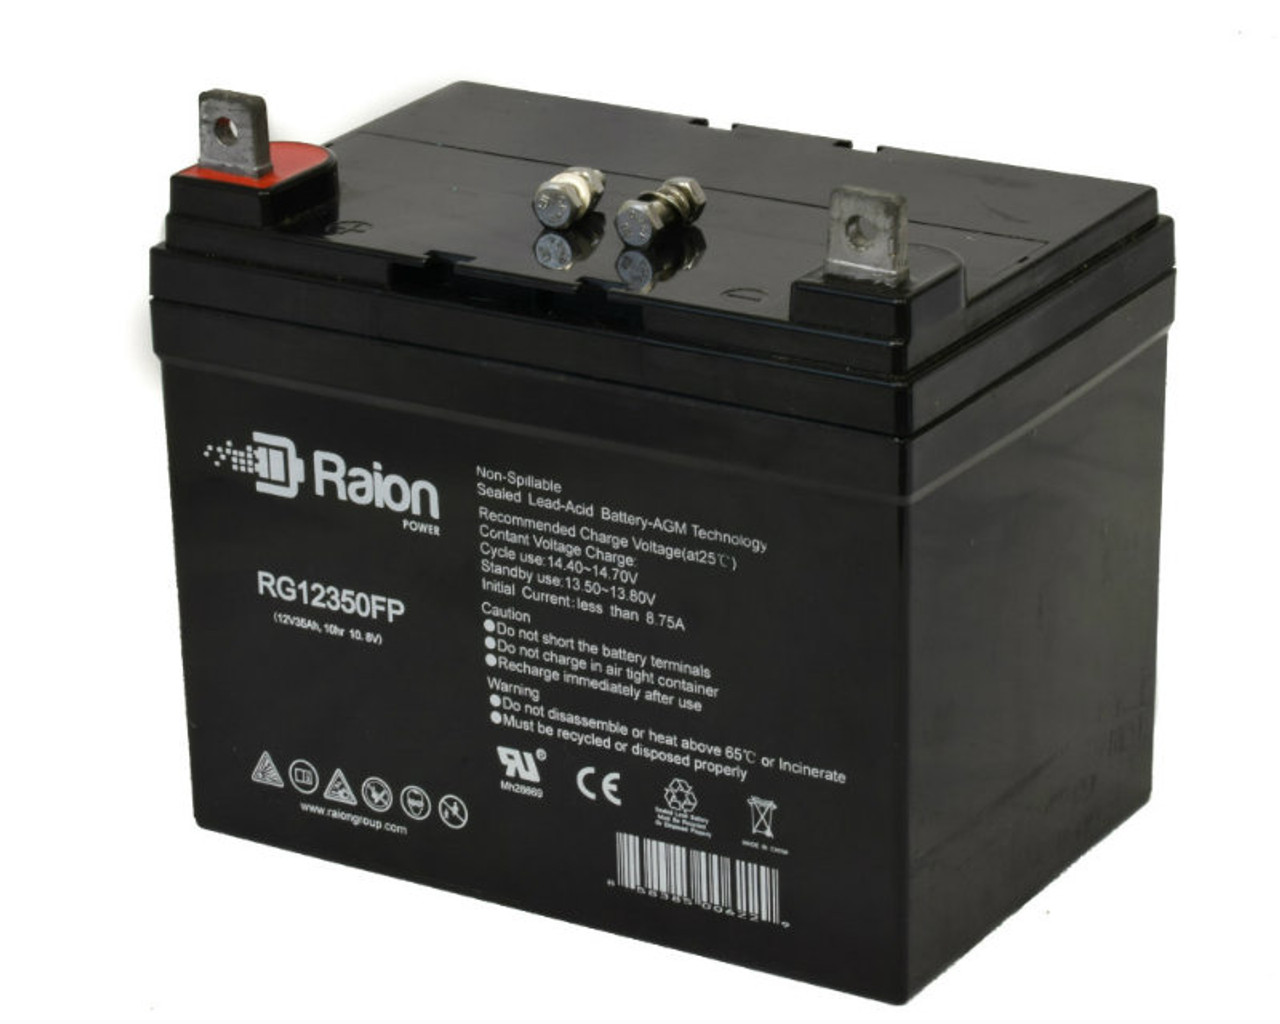 Raion Power Replacement 12V 35Ah RG12350FP Battery for Ariens Gravely 1542